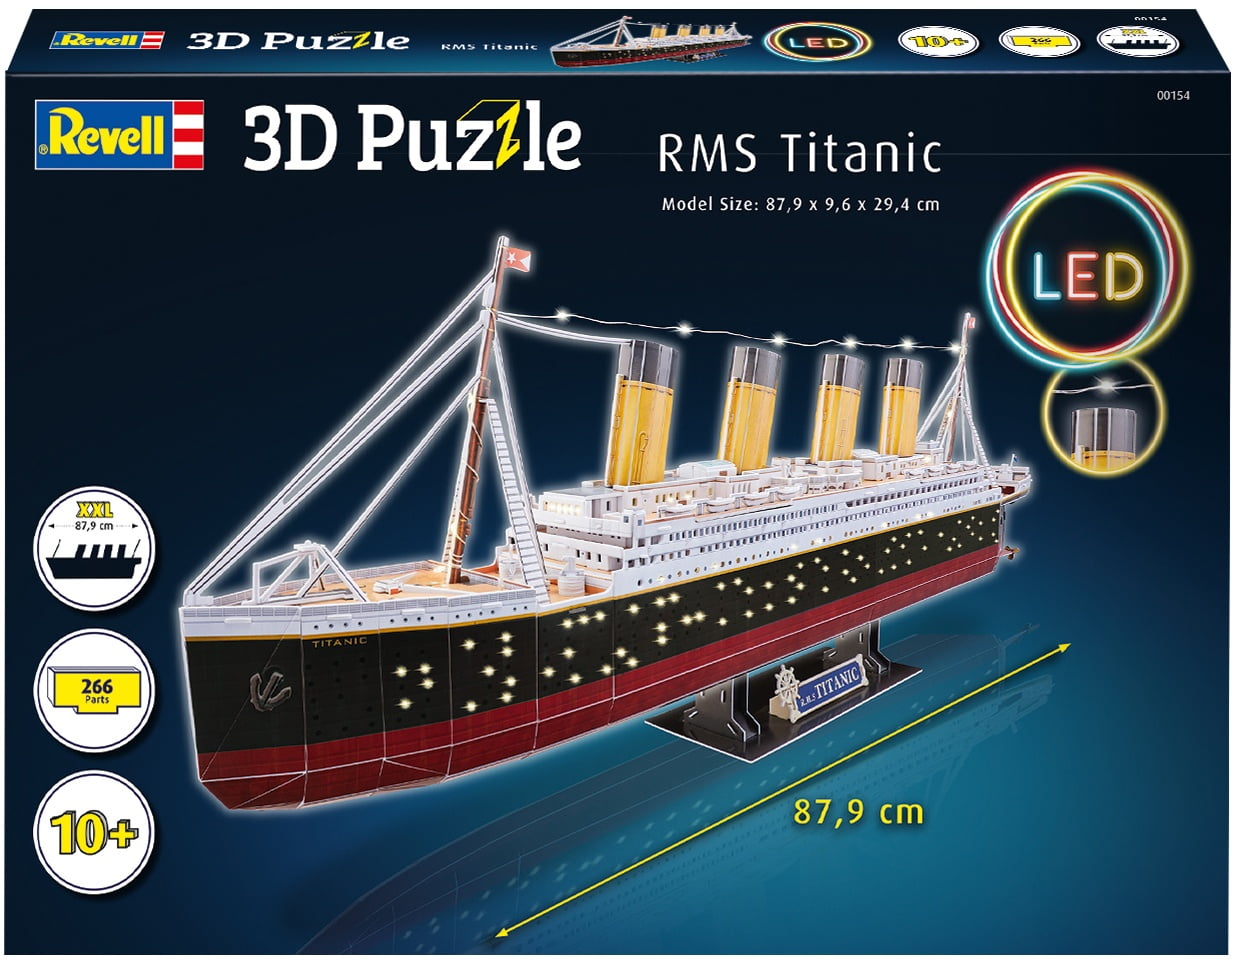 3D puzzle finished on the anniversary of her sinking. : r/titanic